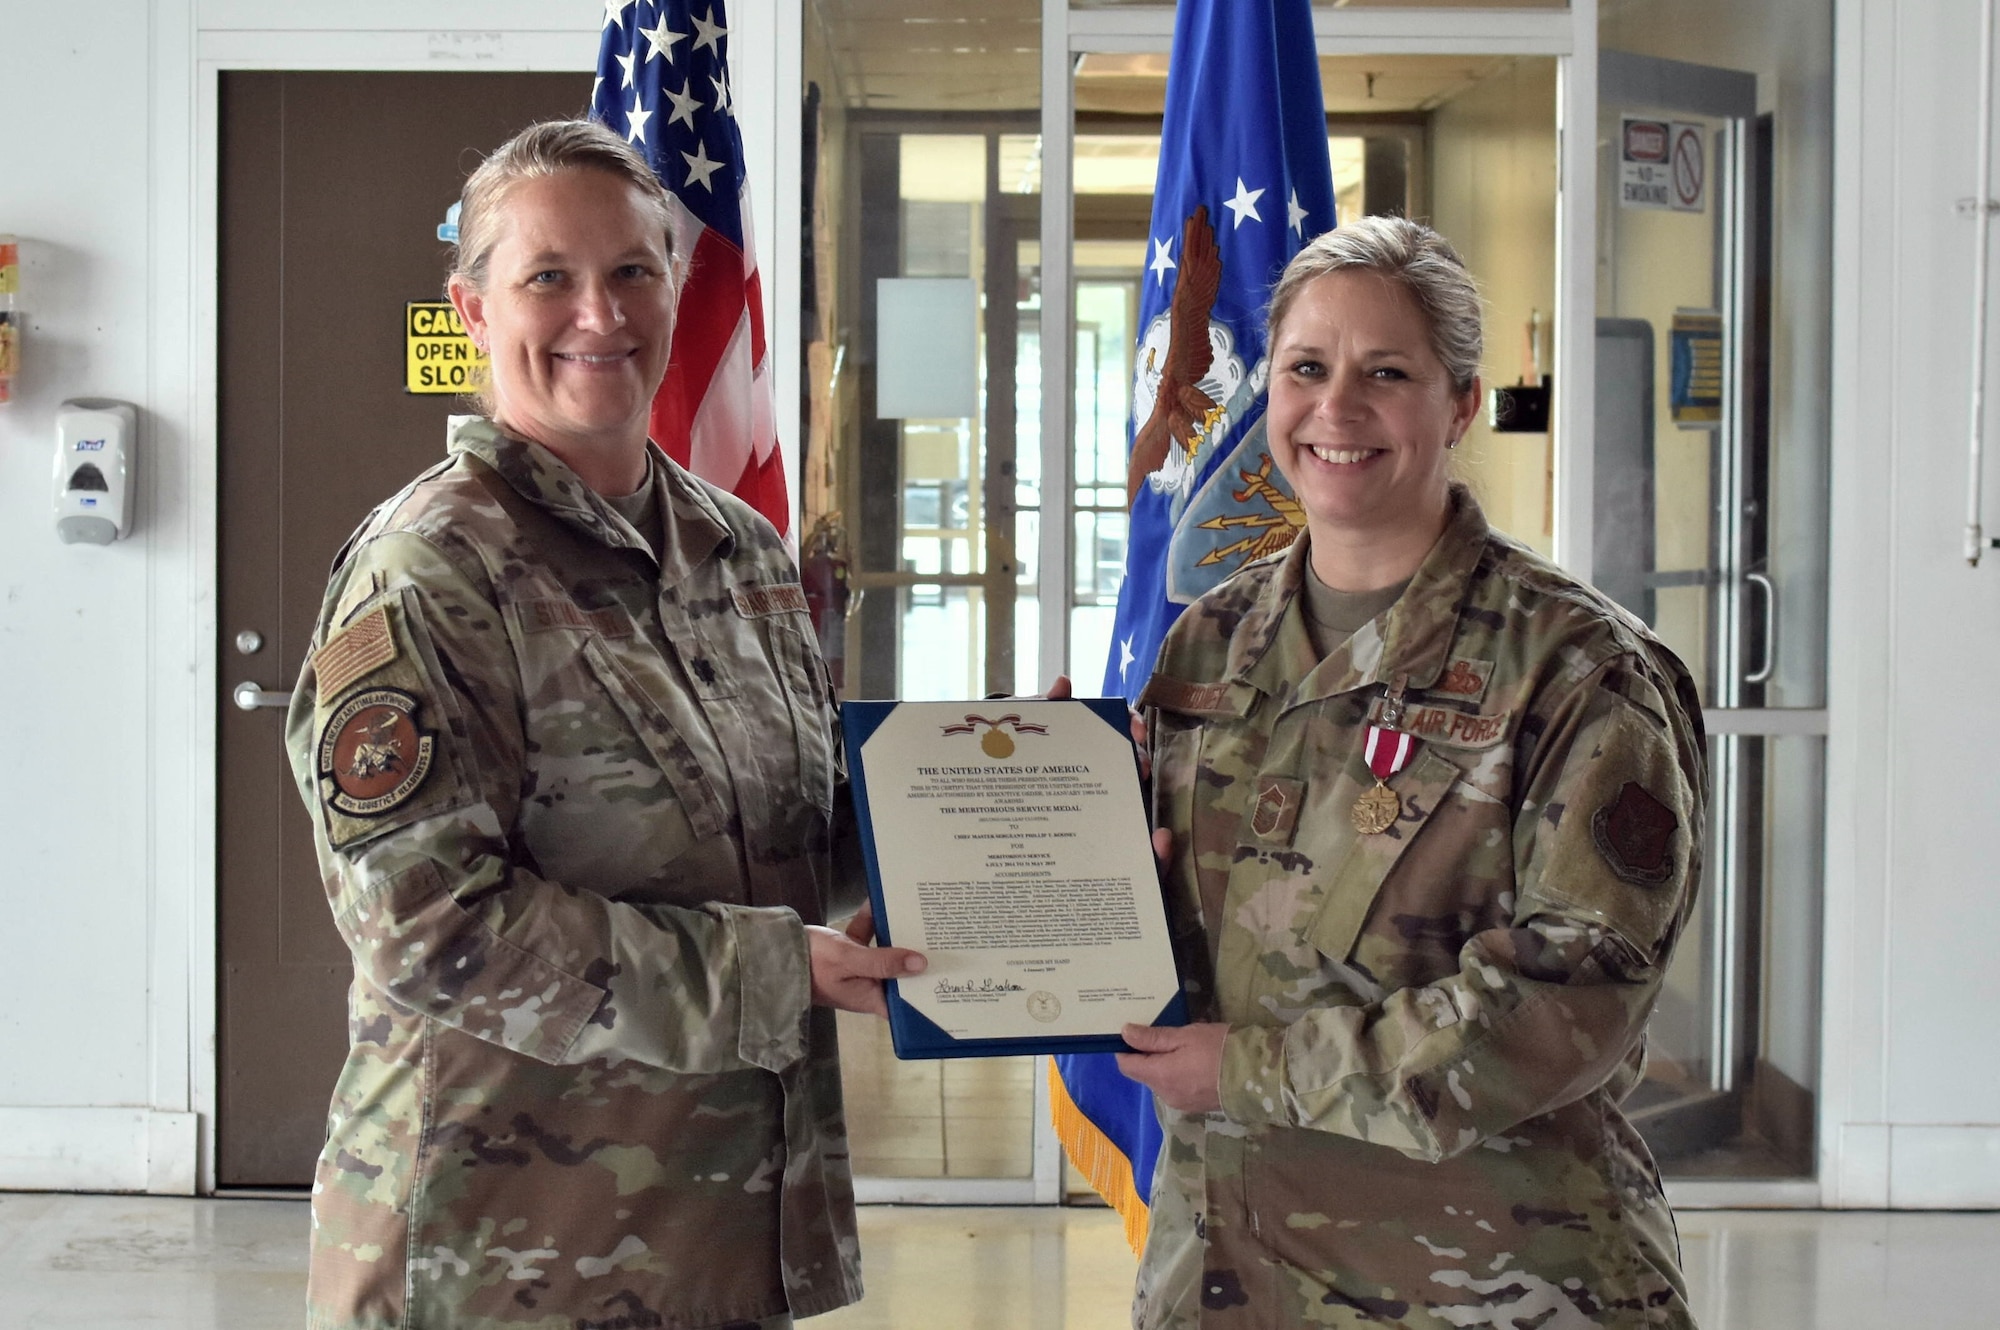 Lt. Col. Farrah Schluter, 301st Logistics Readiness Squadron commander, and Chief Master Sgt. Angela Rooney, 301 FW LRS senior enlisted leader, hold Rooney’s retirement order at Naval Air Station Joint Reserve Base Fort Worth, Texas on June 4, 2022. Rooney officially retires in October 2022, after 25 years of military service. (U.S. Air Force photo by Staff Sgt. Randall Moose)